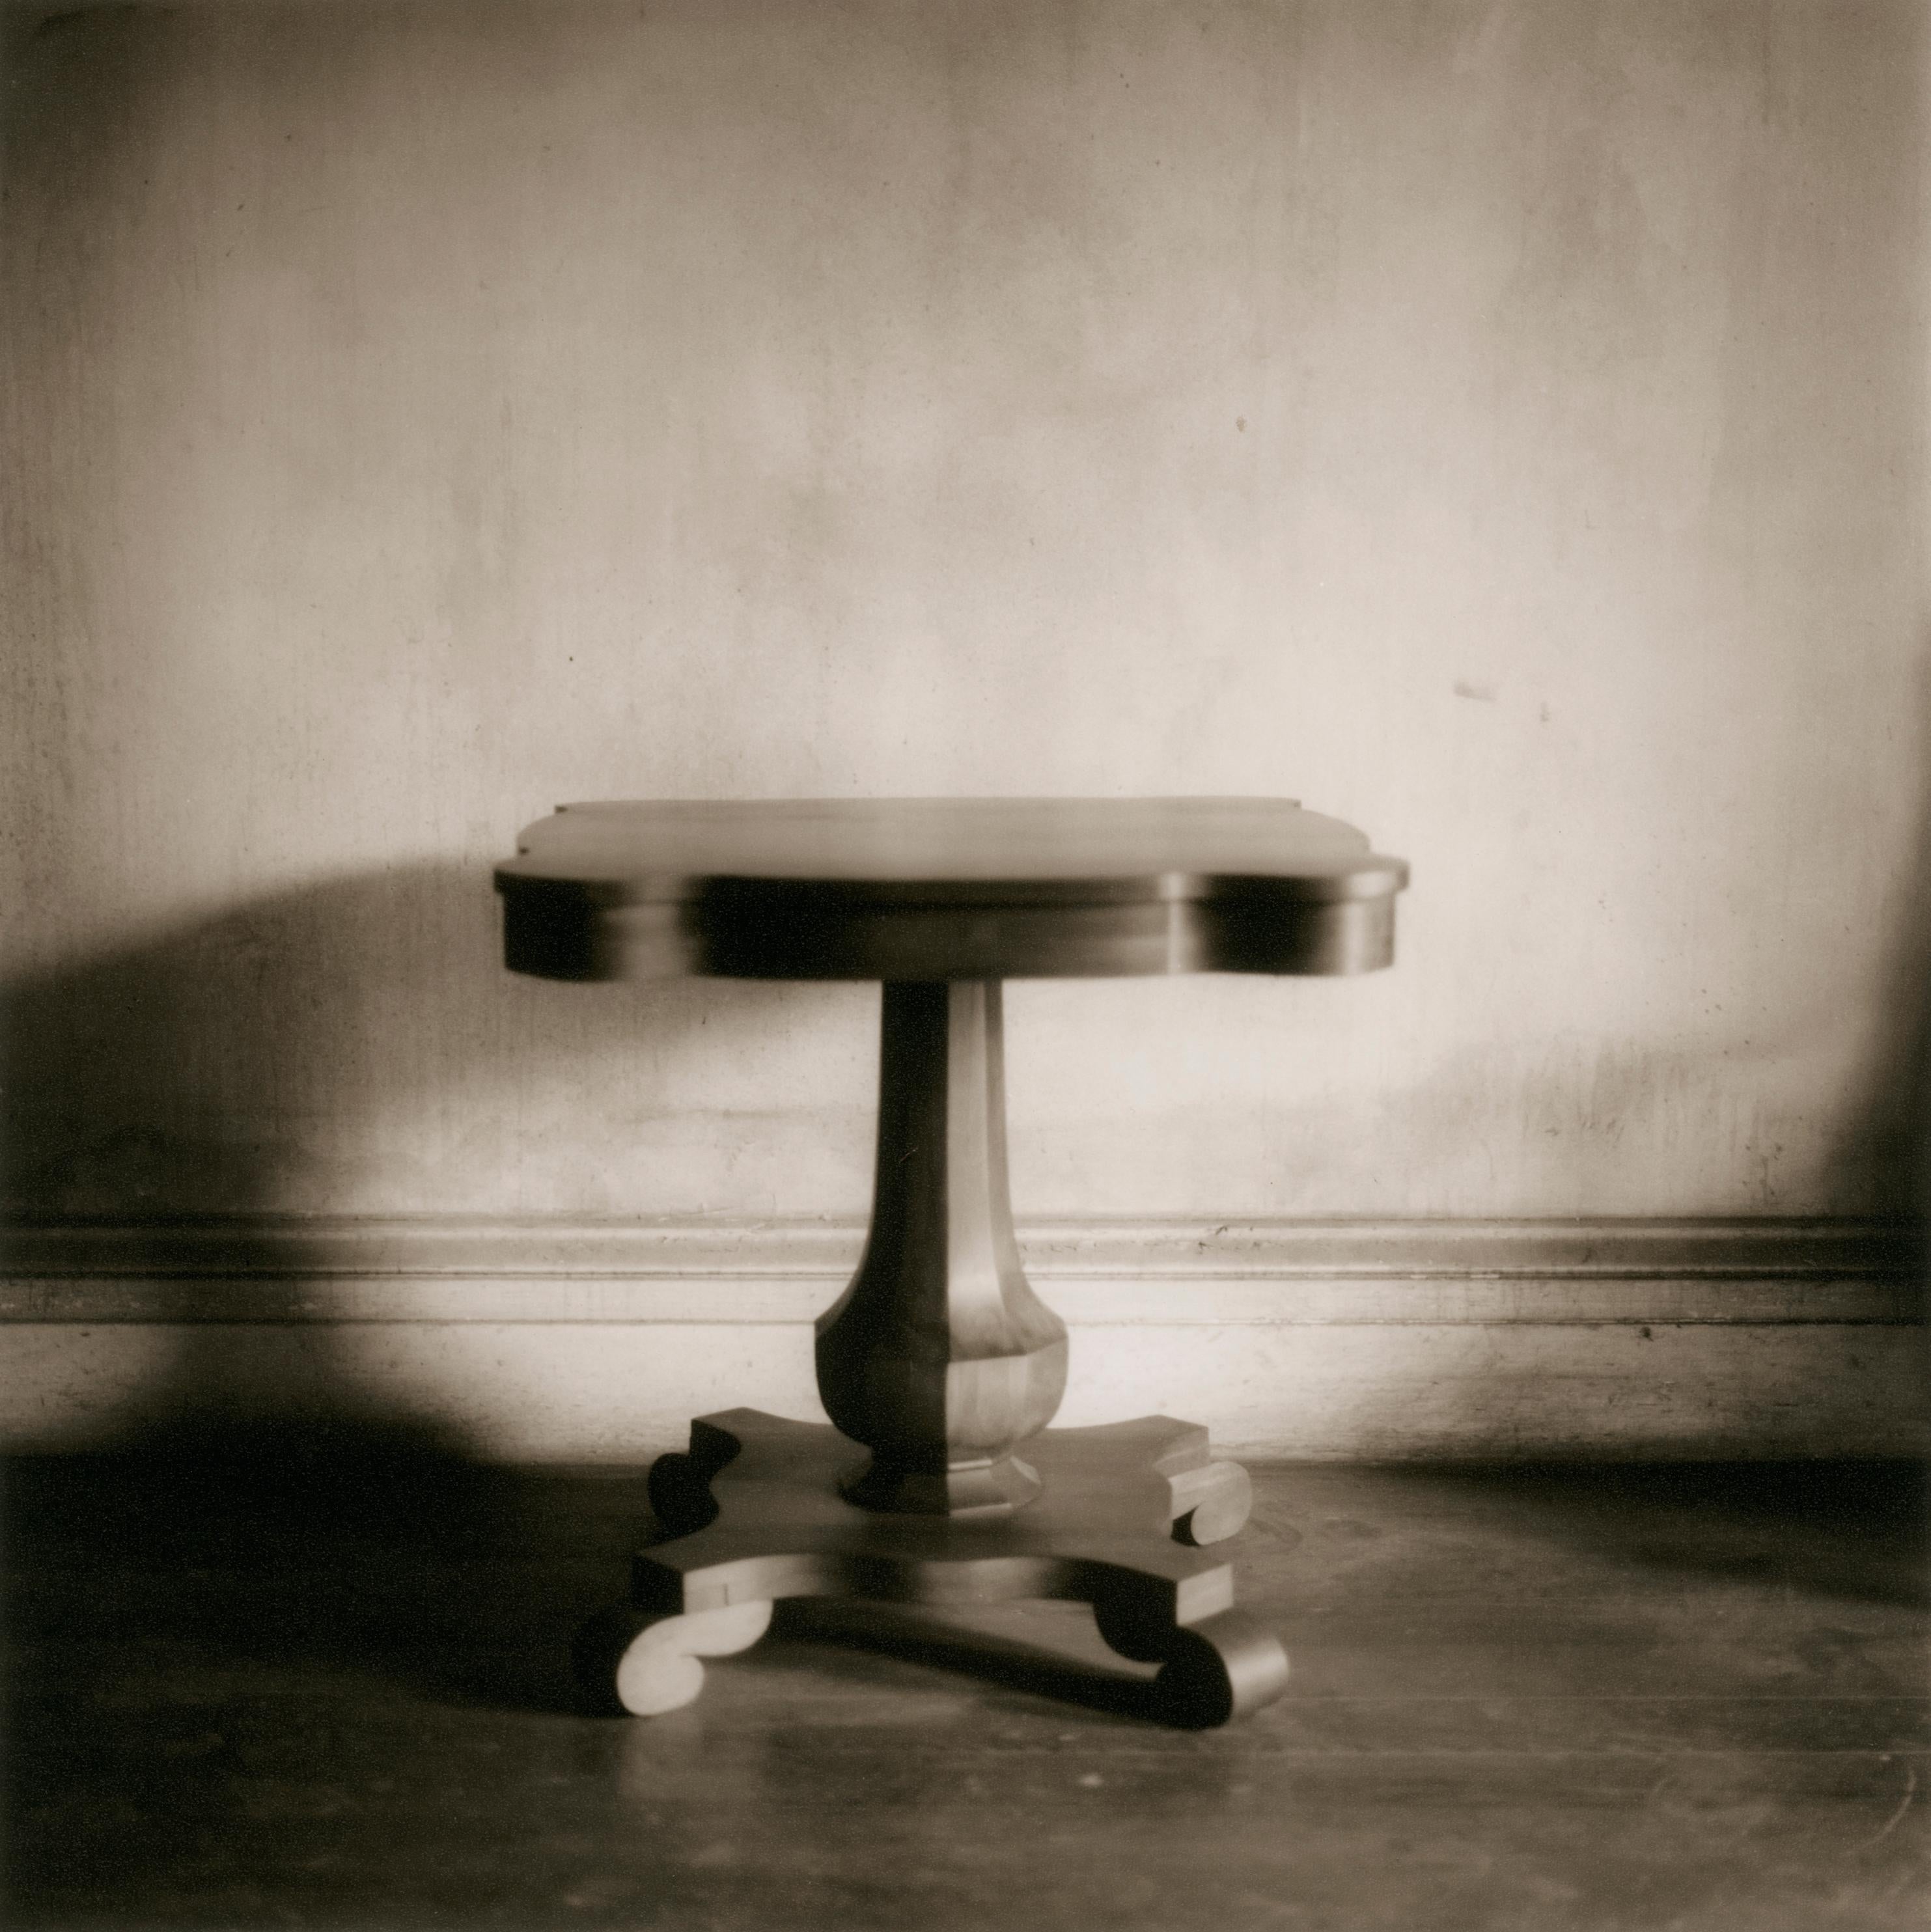 David Halliday Still-Life Photograph - Square Table (Contemporary Sepia Toned Still Life Photograph of Antique Table)